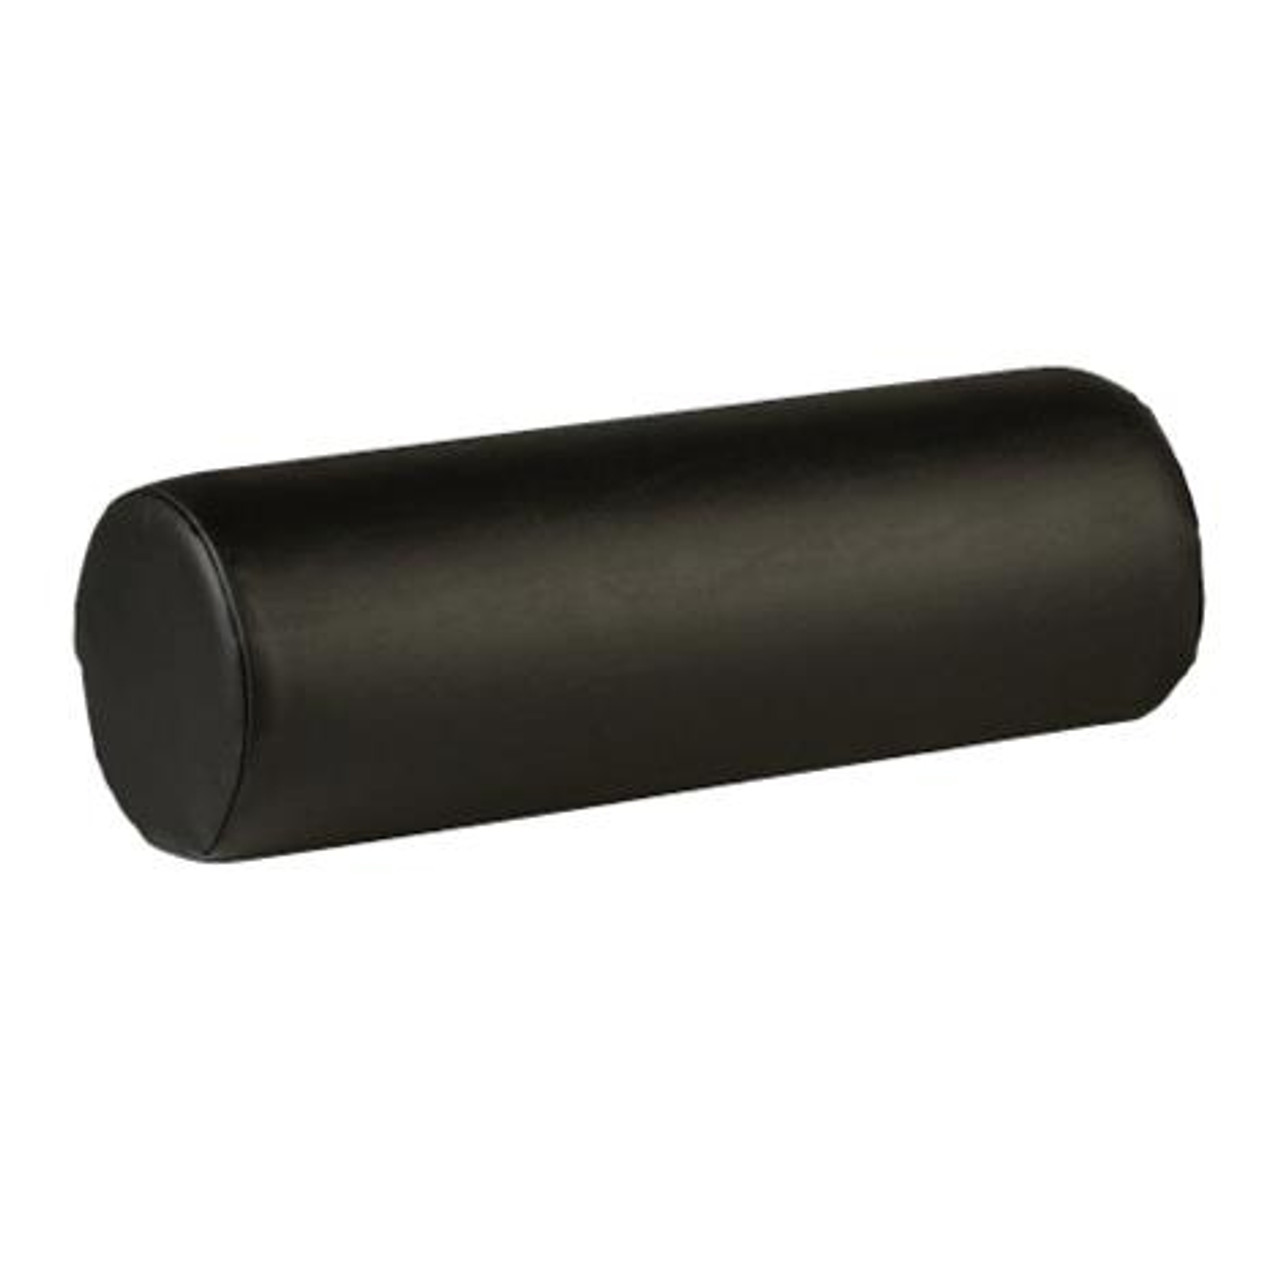 Core Products PRO-905 Dutchman Roll Positioning Roll - 8"x18"